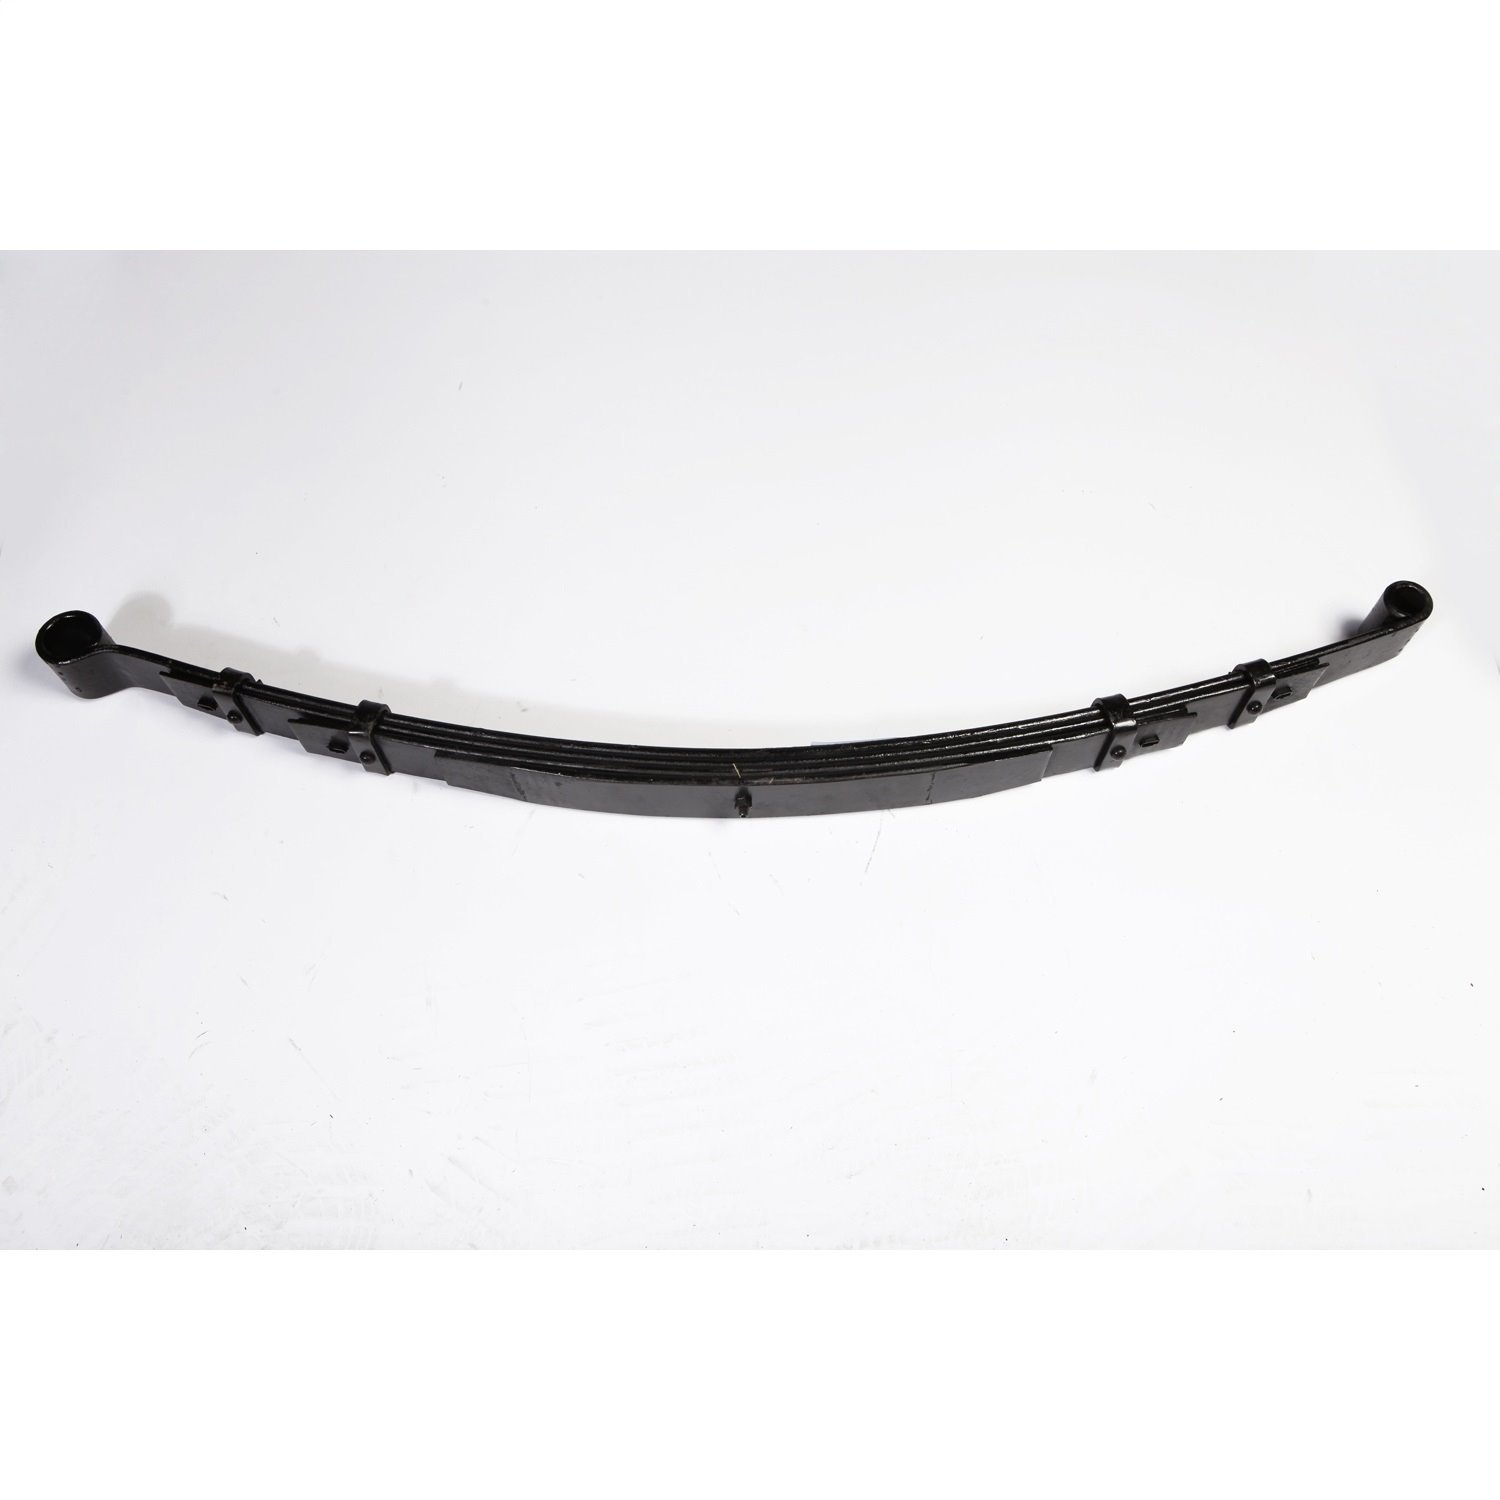 Replacement rear leaf spring from Omix-ADA has 4 leaves., Fits 76-83 Jeep CJ5 76-86 CJ7 and 81-86 CJ8